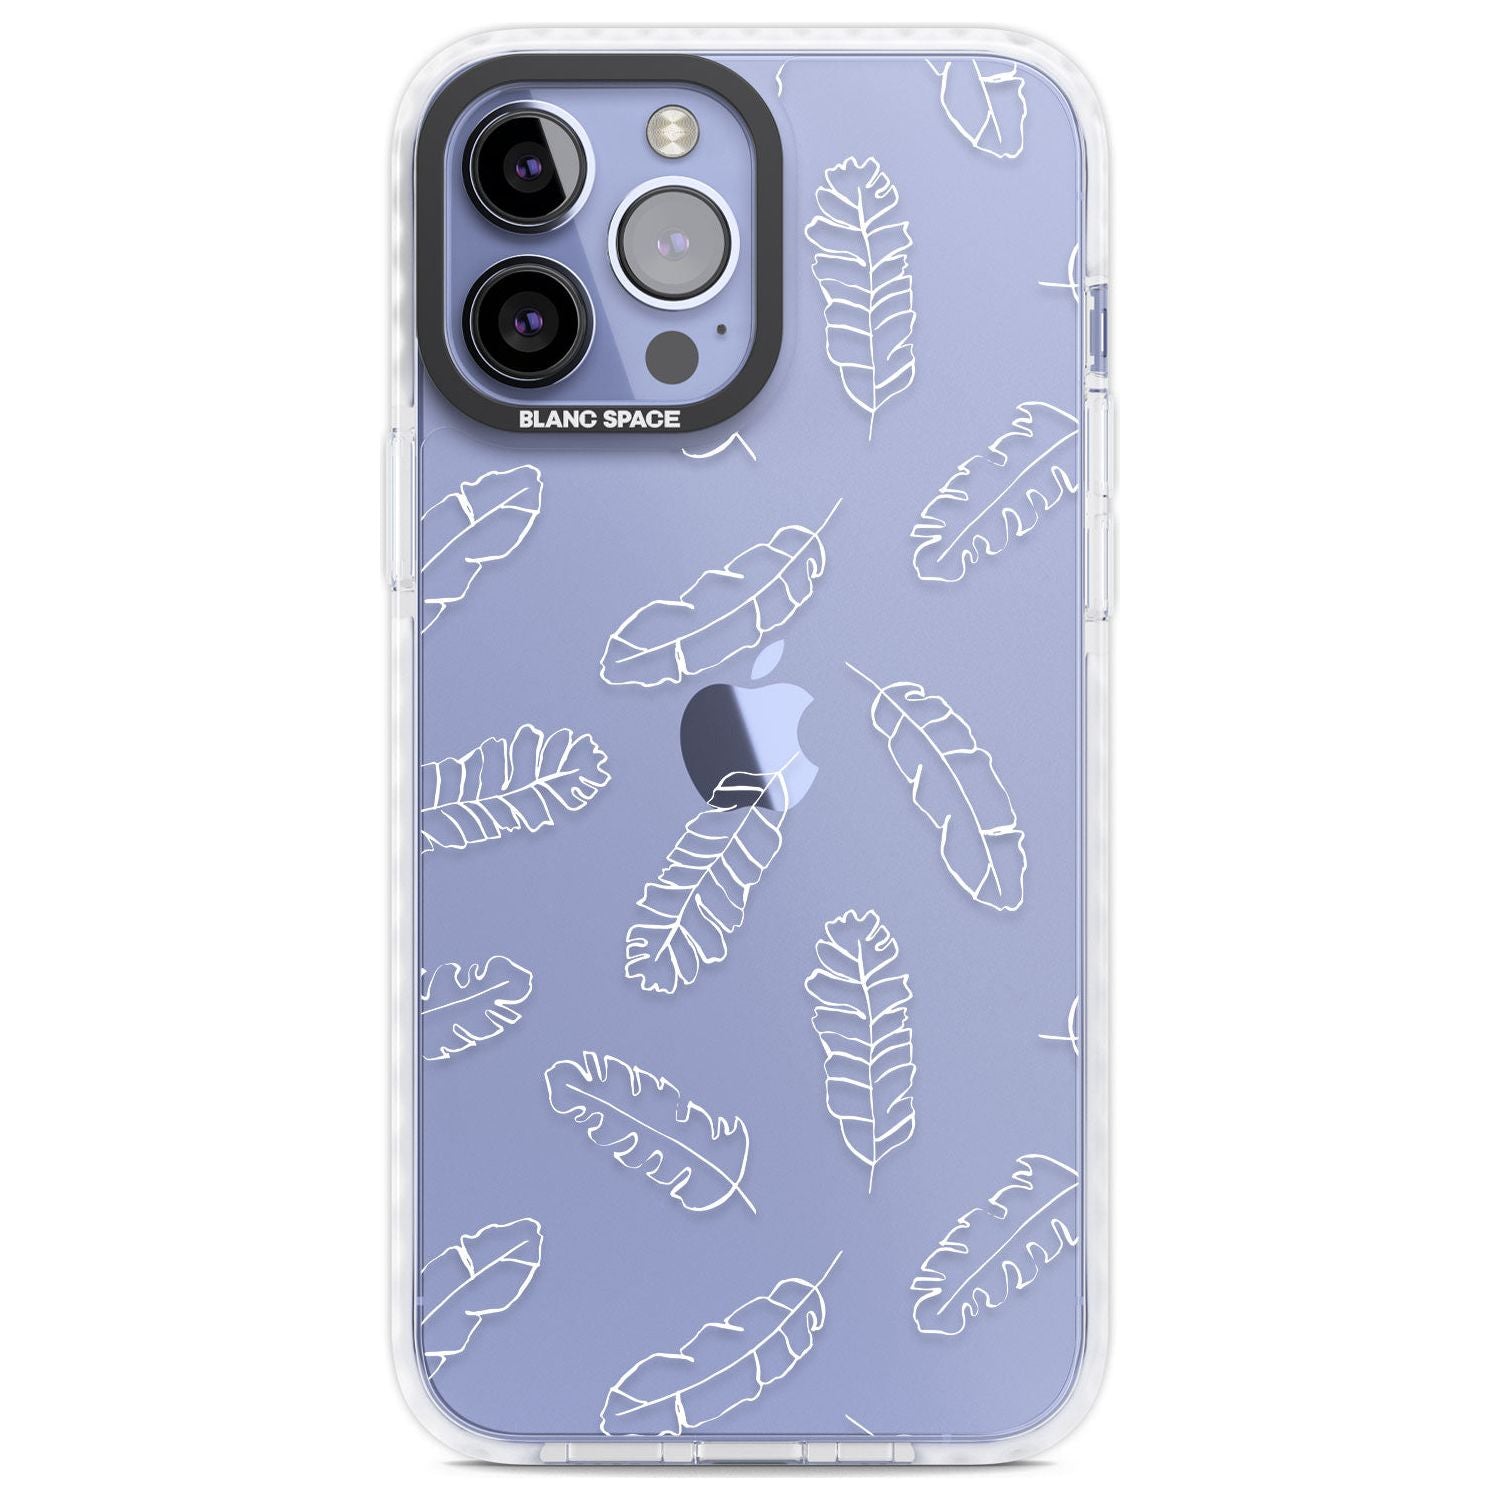 Clear Botanical Designs: Palm Leaves Phone Case iPhone 13 Pro Max / Impact Case,iPhone 14 Pro Max / Impact Case Blanc Space